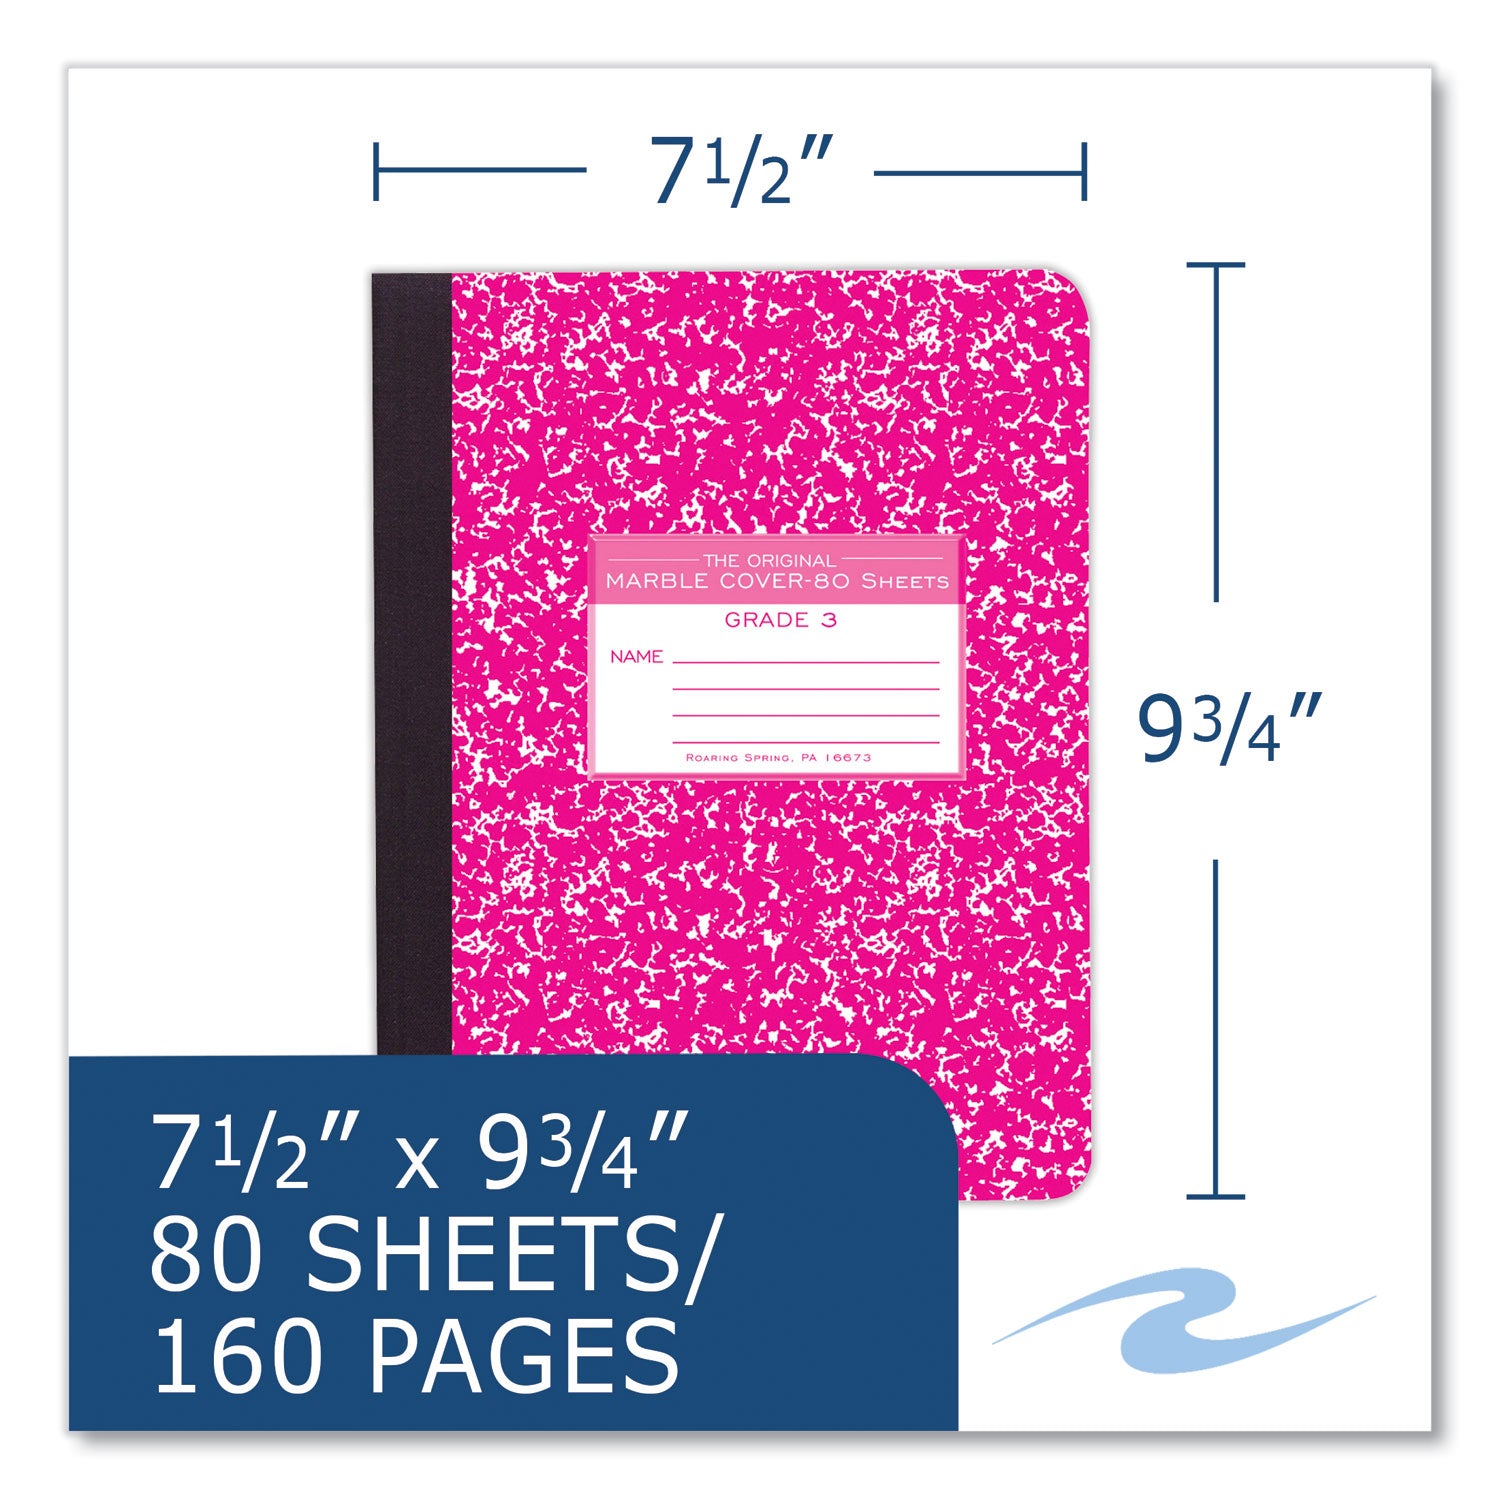 ruled-composition-book-grade-3-manuscript-format-magenta-marble-cover-80-975-x-75-sheet-48-ct-ships-in-4-6-bus-days_roa97227cs - 5